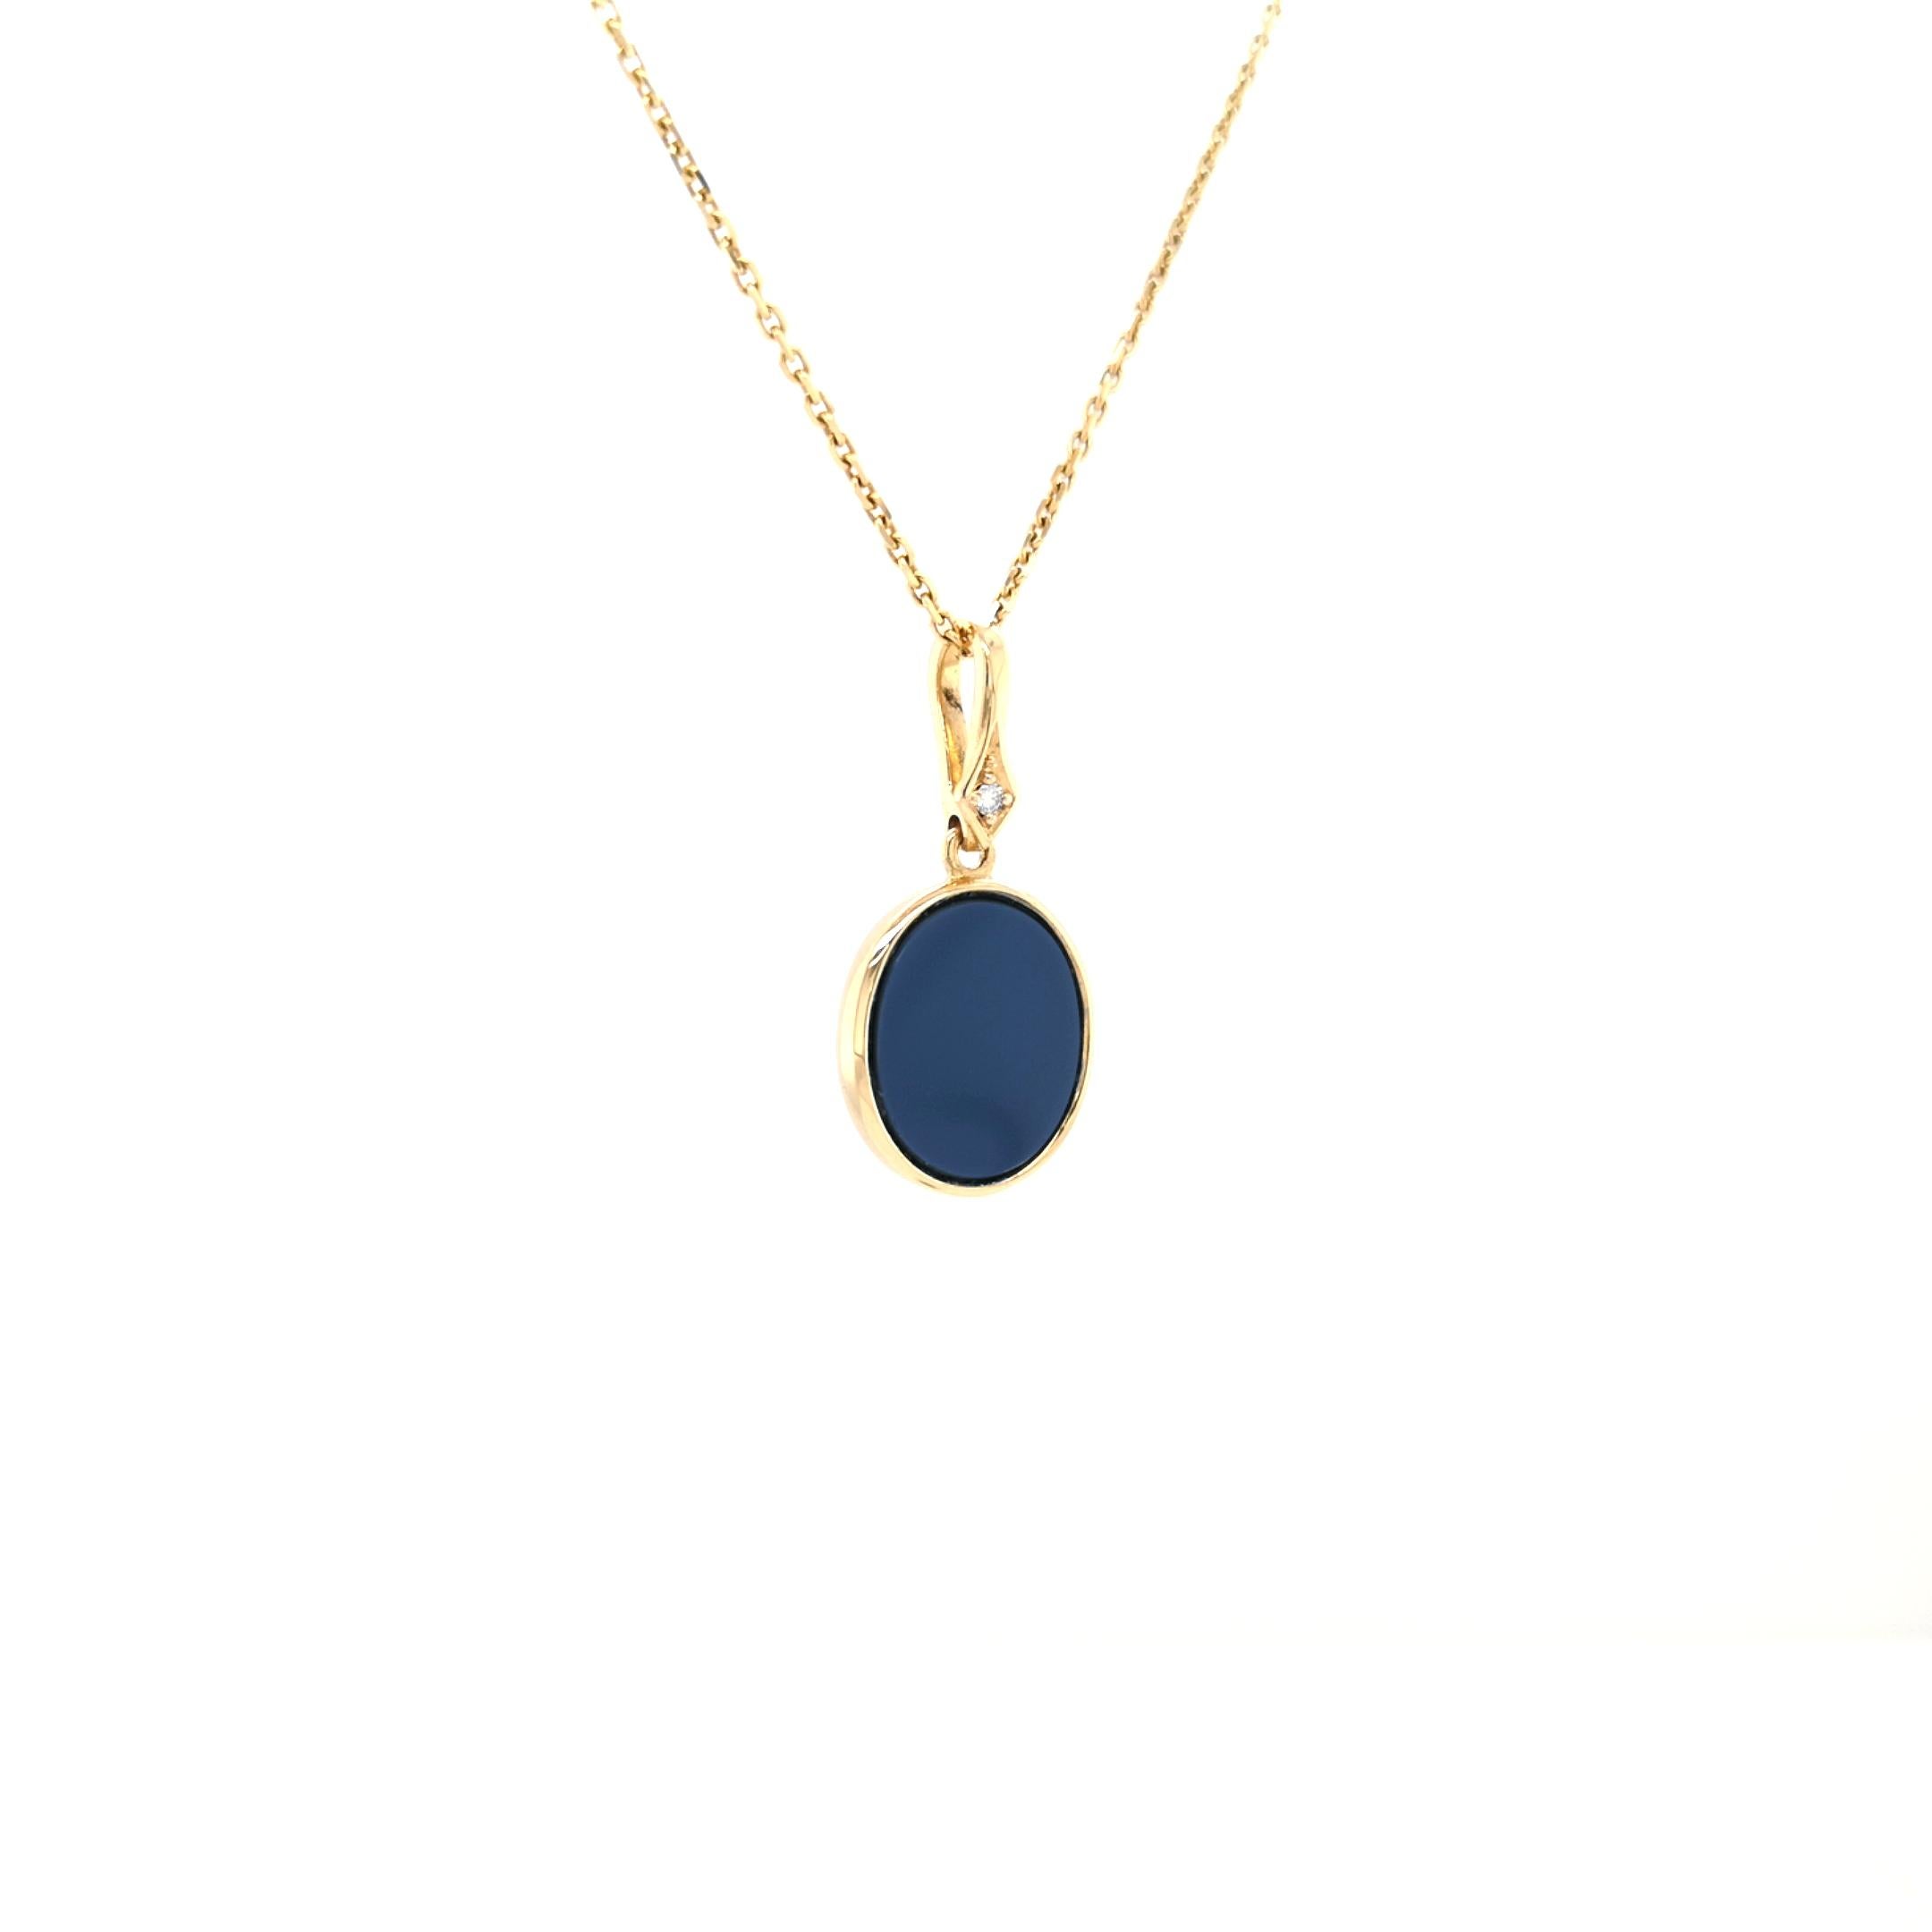 Contemporary Oval Pendant Necklace 18k Yellow Gold 1 Diamond 0.02 ct G VS Blue Layered Onyx For Sale